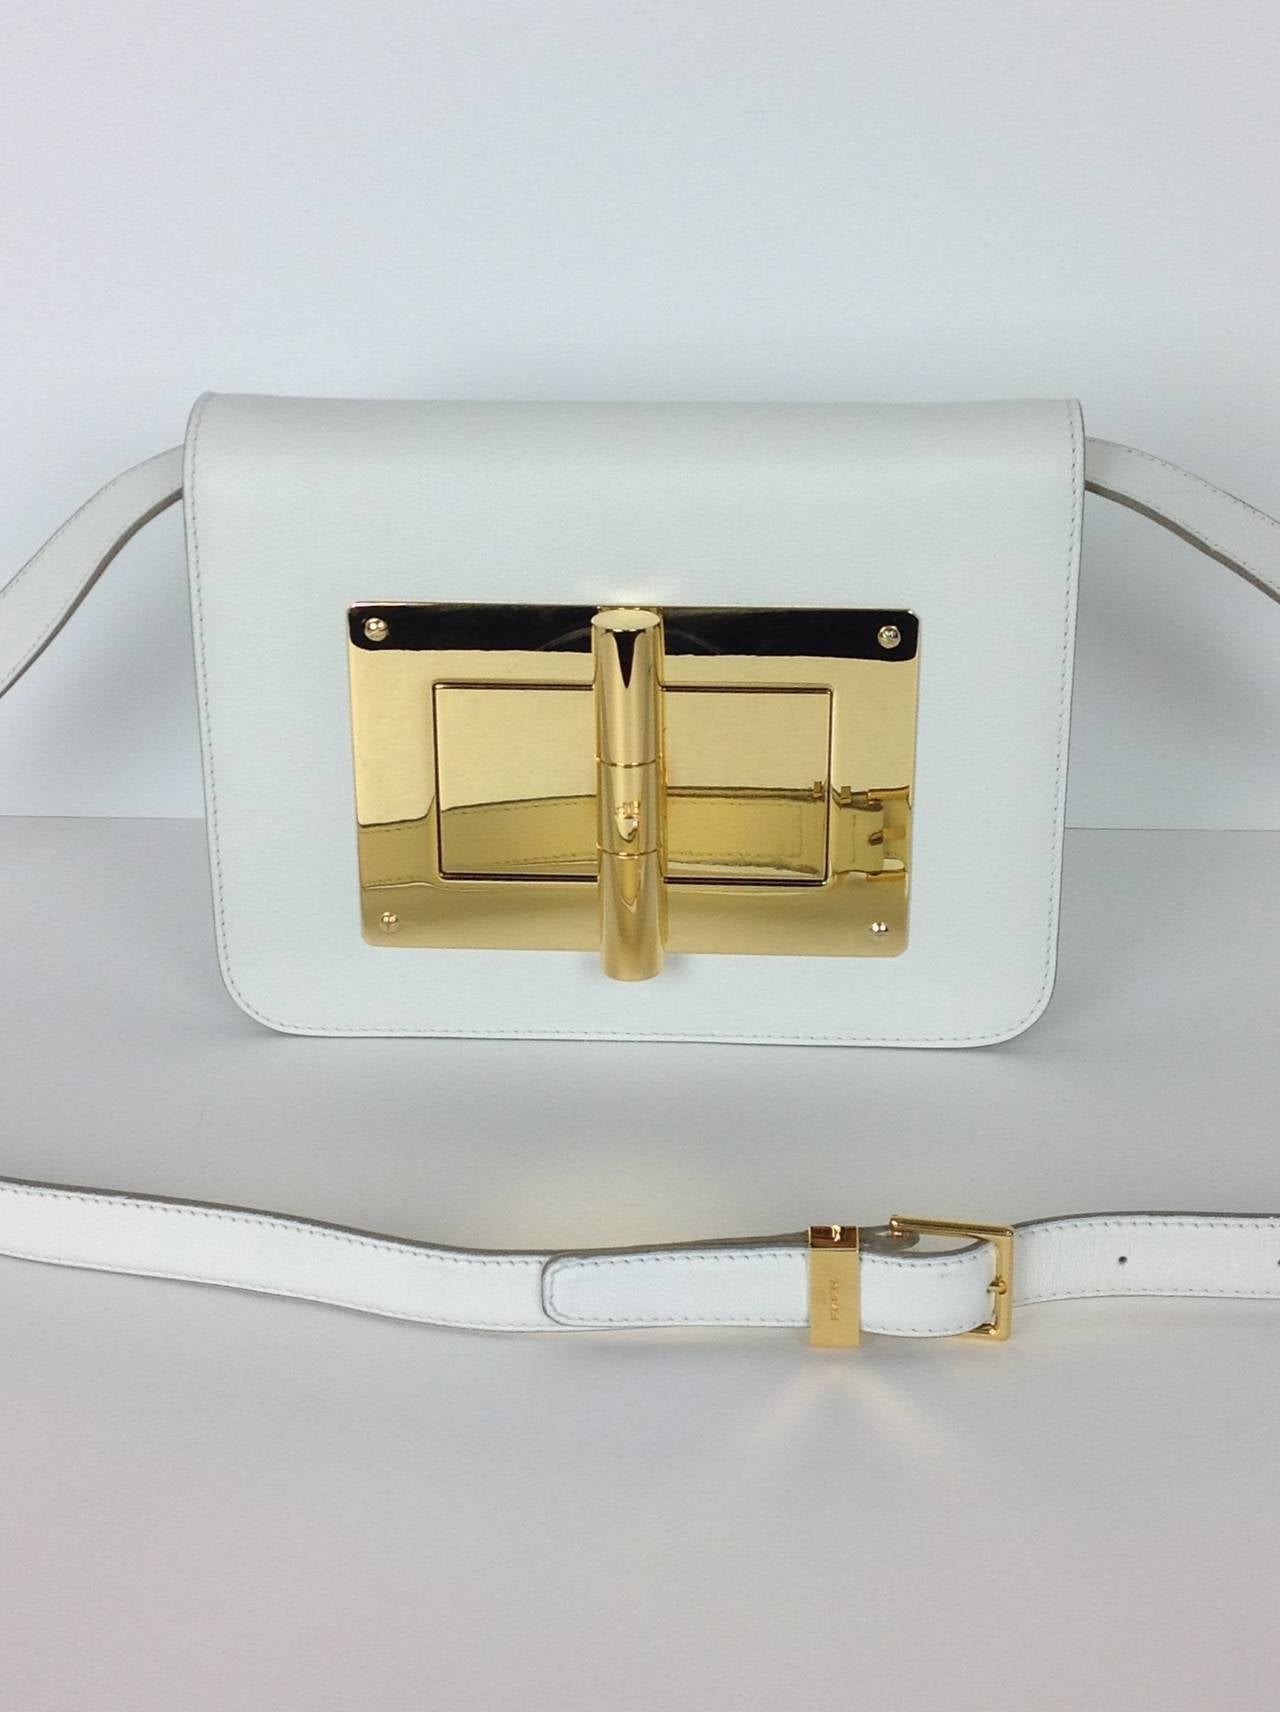 Natalia Bag by Tom Ford. Very Versitile-can be worn as a clutch or shoulder bag.
Grained kidskin leather with polished goldtone hardware.Flap front with logo engraved, oversized turn lock closure. Suede lined slit pocket on back.
8.25